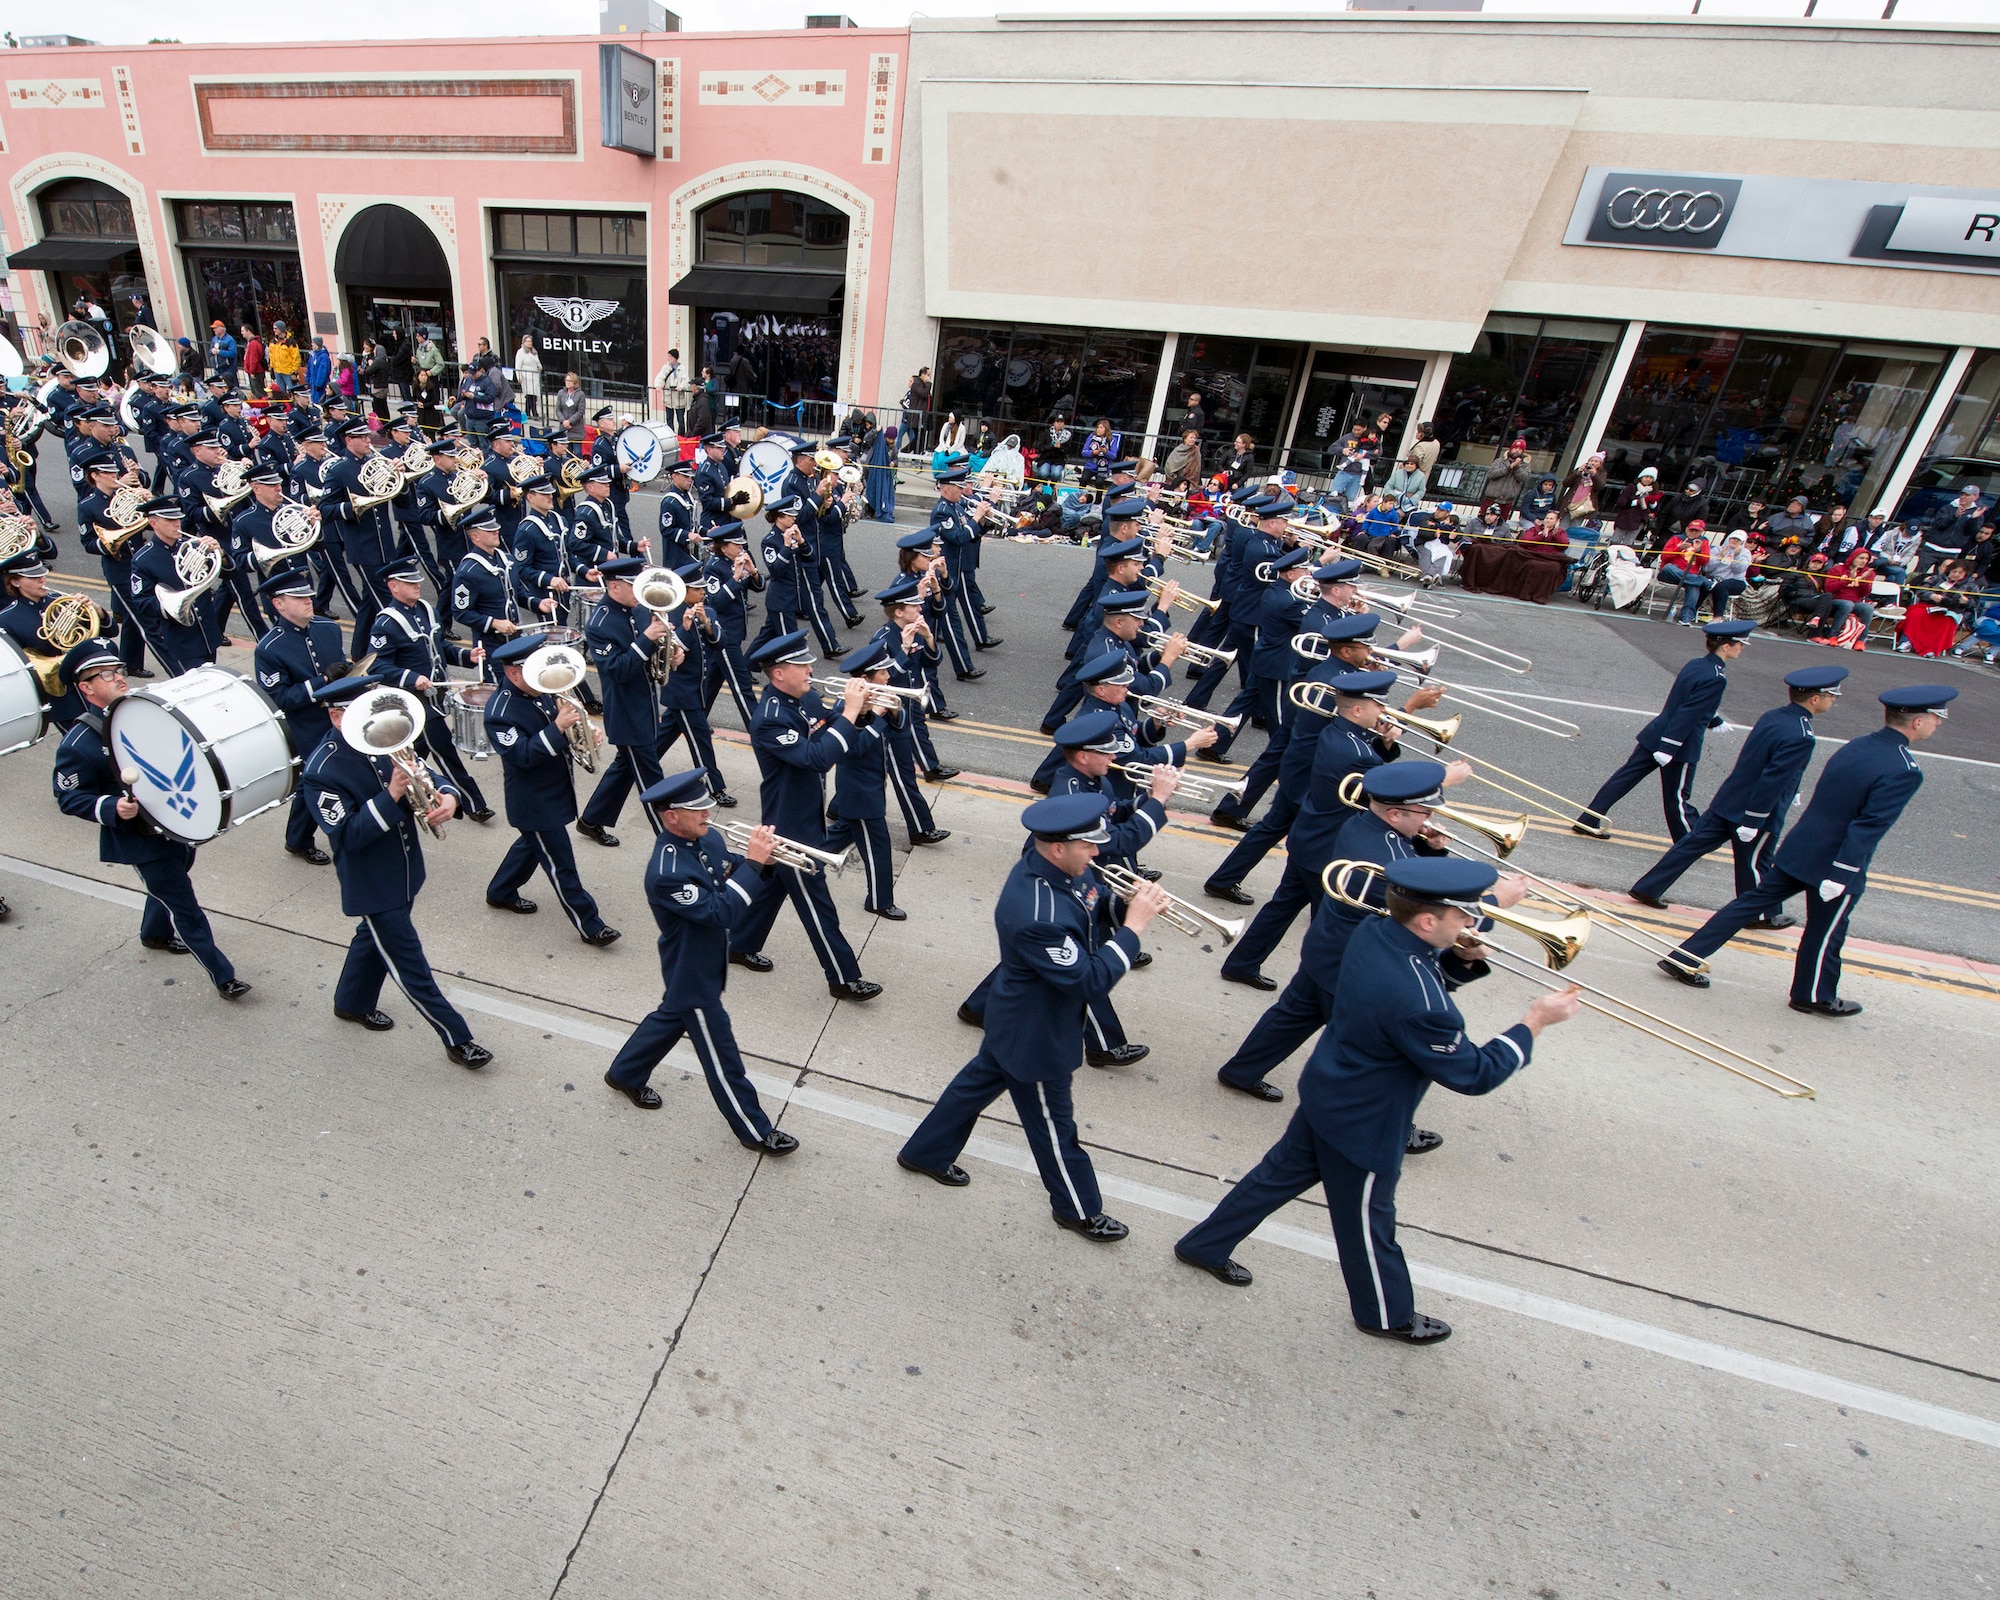 The United States Air Force Total Force Band performs in the 128th Rose Parade in Pasadena, Calif., Jan. 2, 2017. The band is comprised of active-duty and Air National Guard musicians from around the Air Force. (U.S. Air Force photo/Louis Briscese)